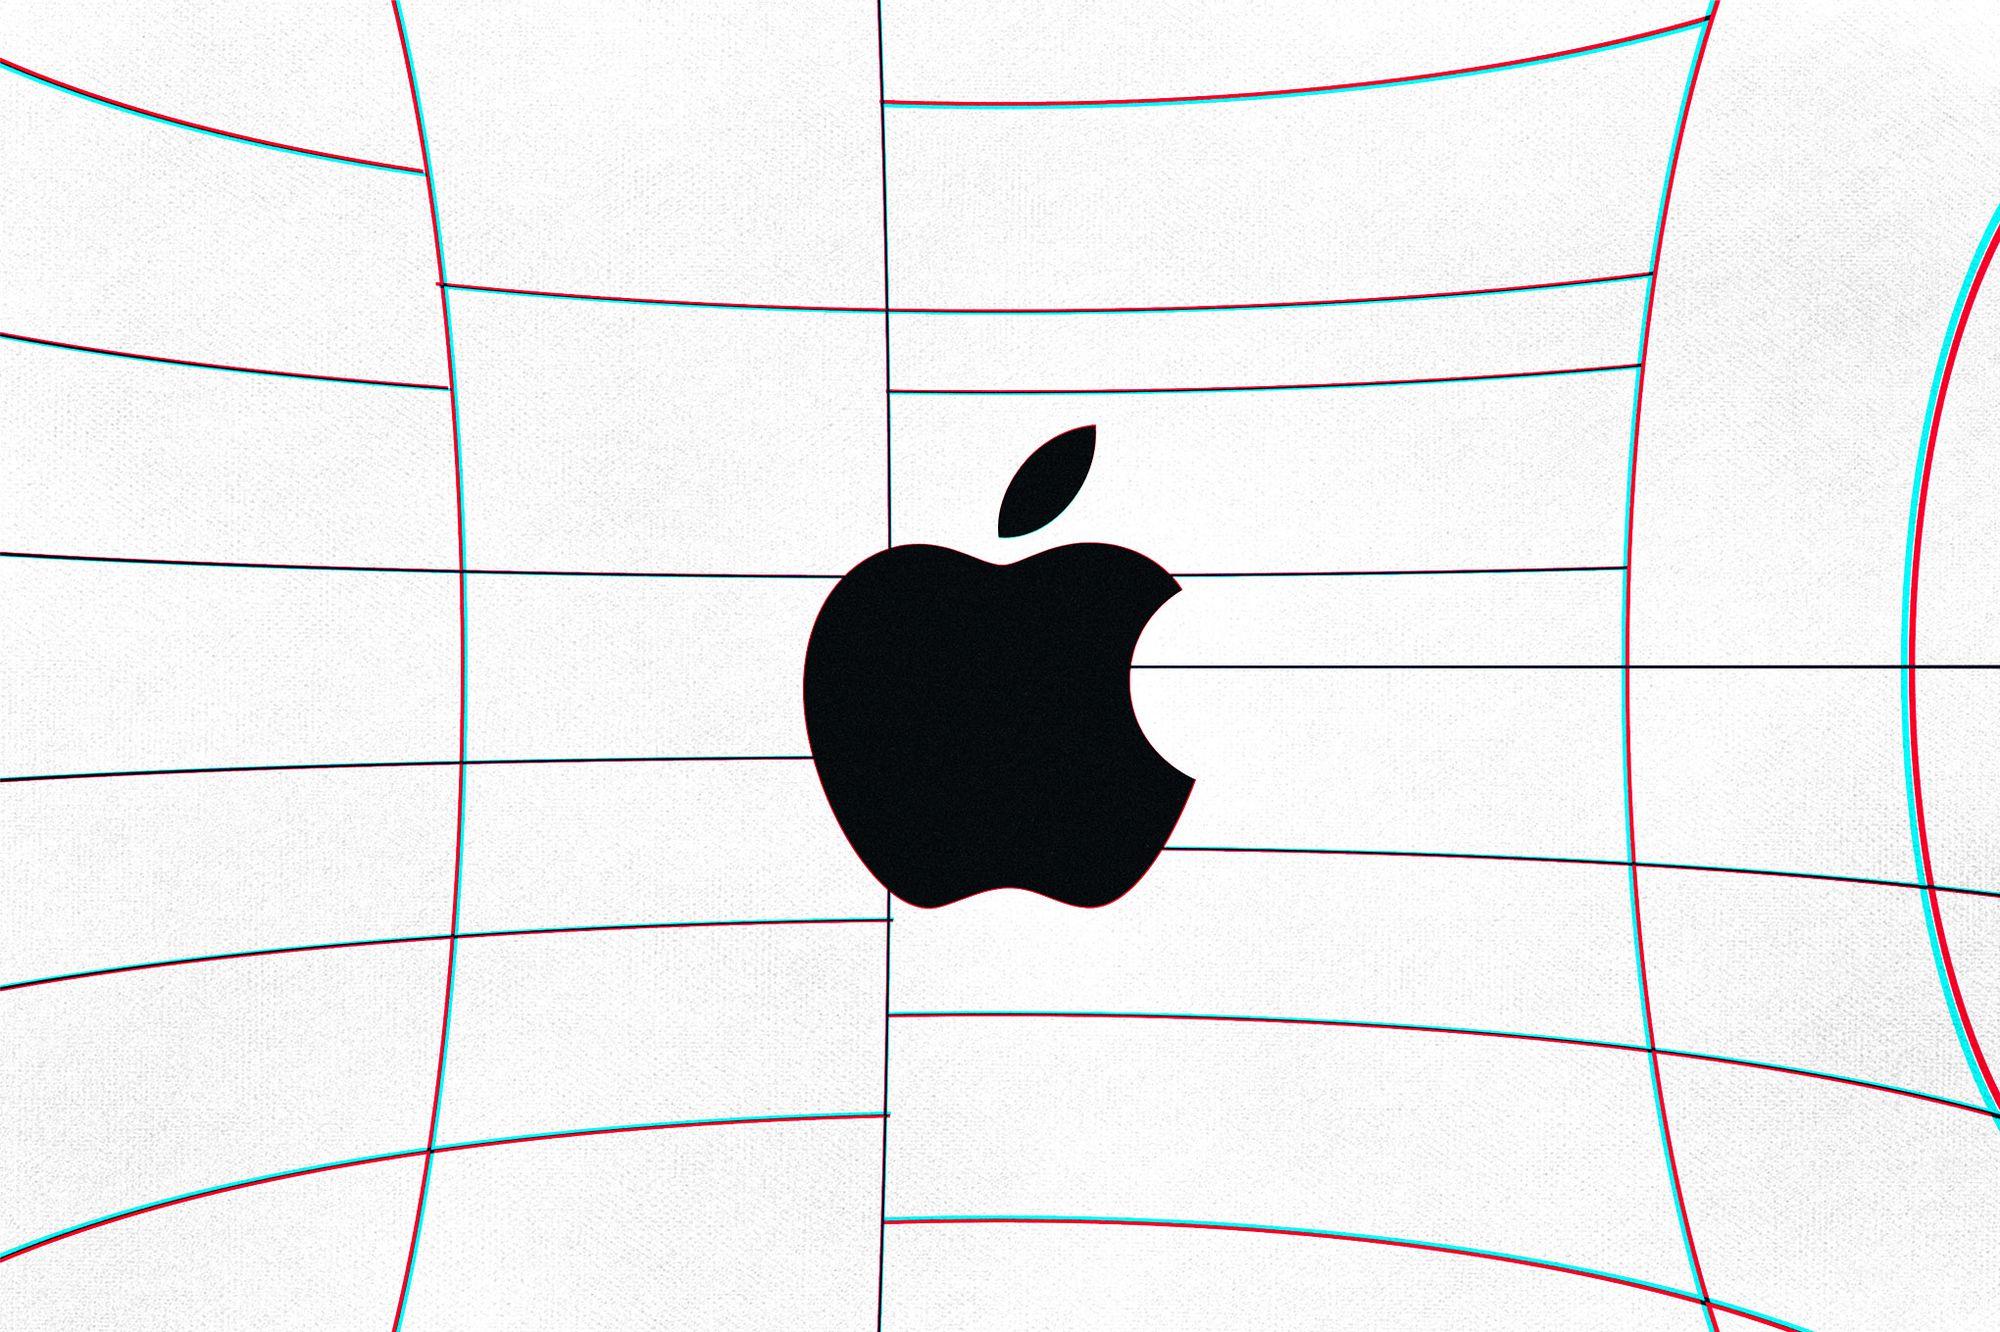 Trademark filings point to Reality branding for Apples mixed